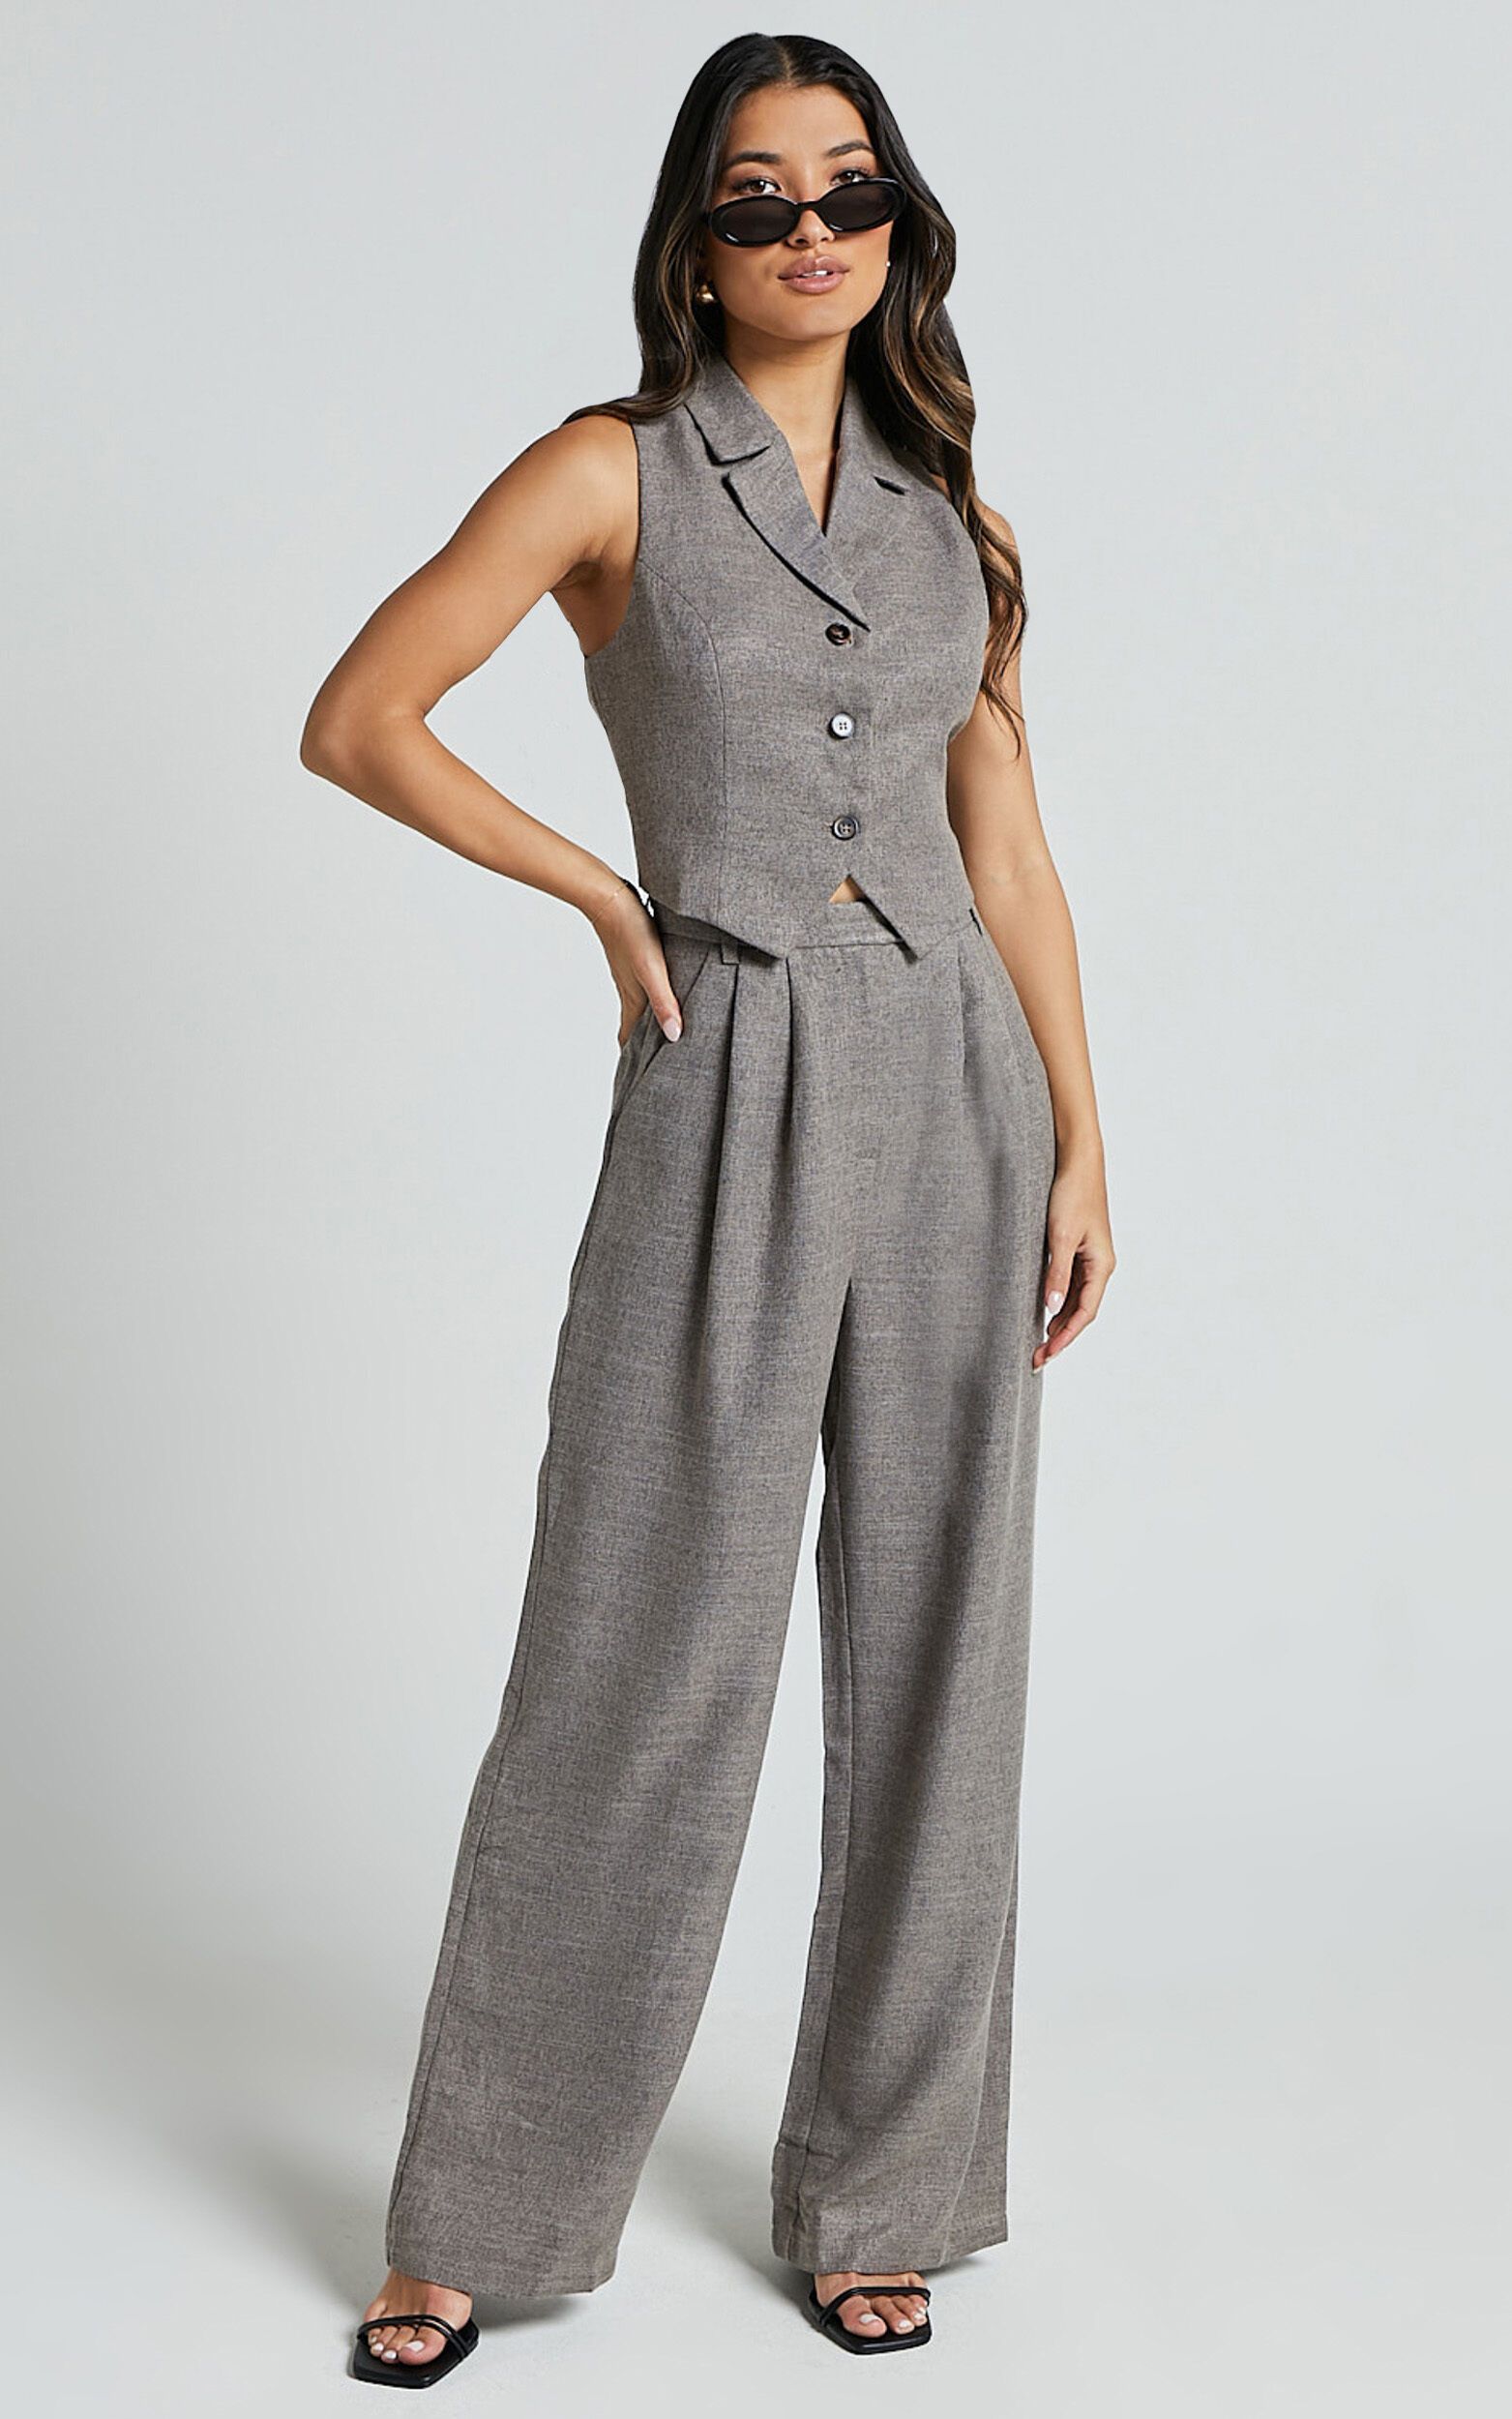 Andie Pants - High Waist Tailored Pants in Grey | Showpo (ANZ)